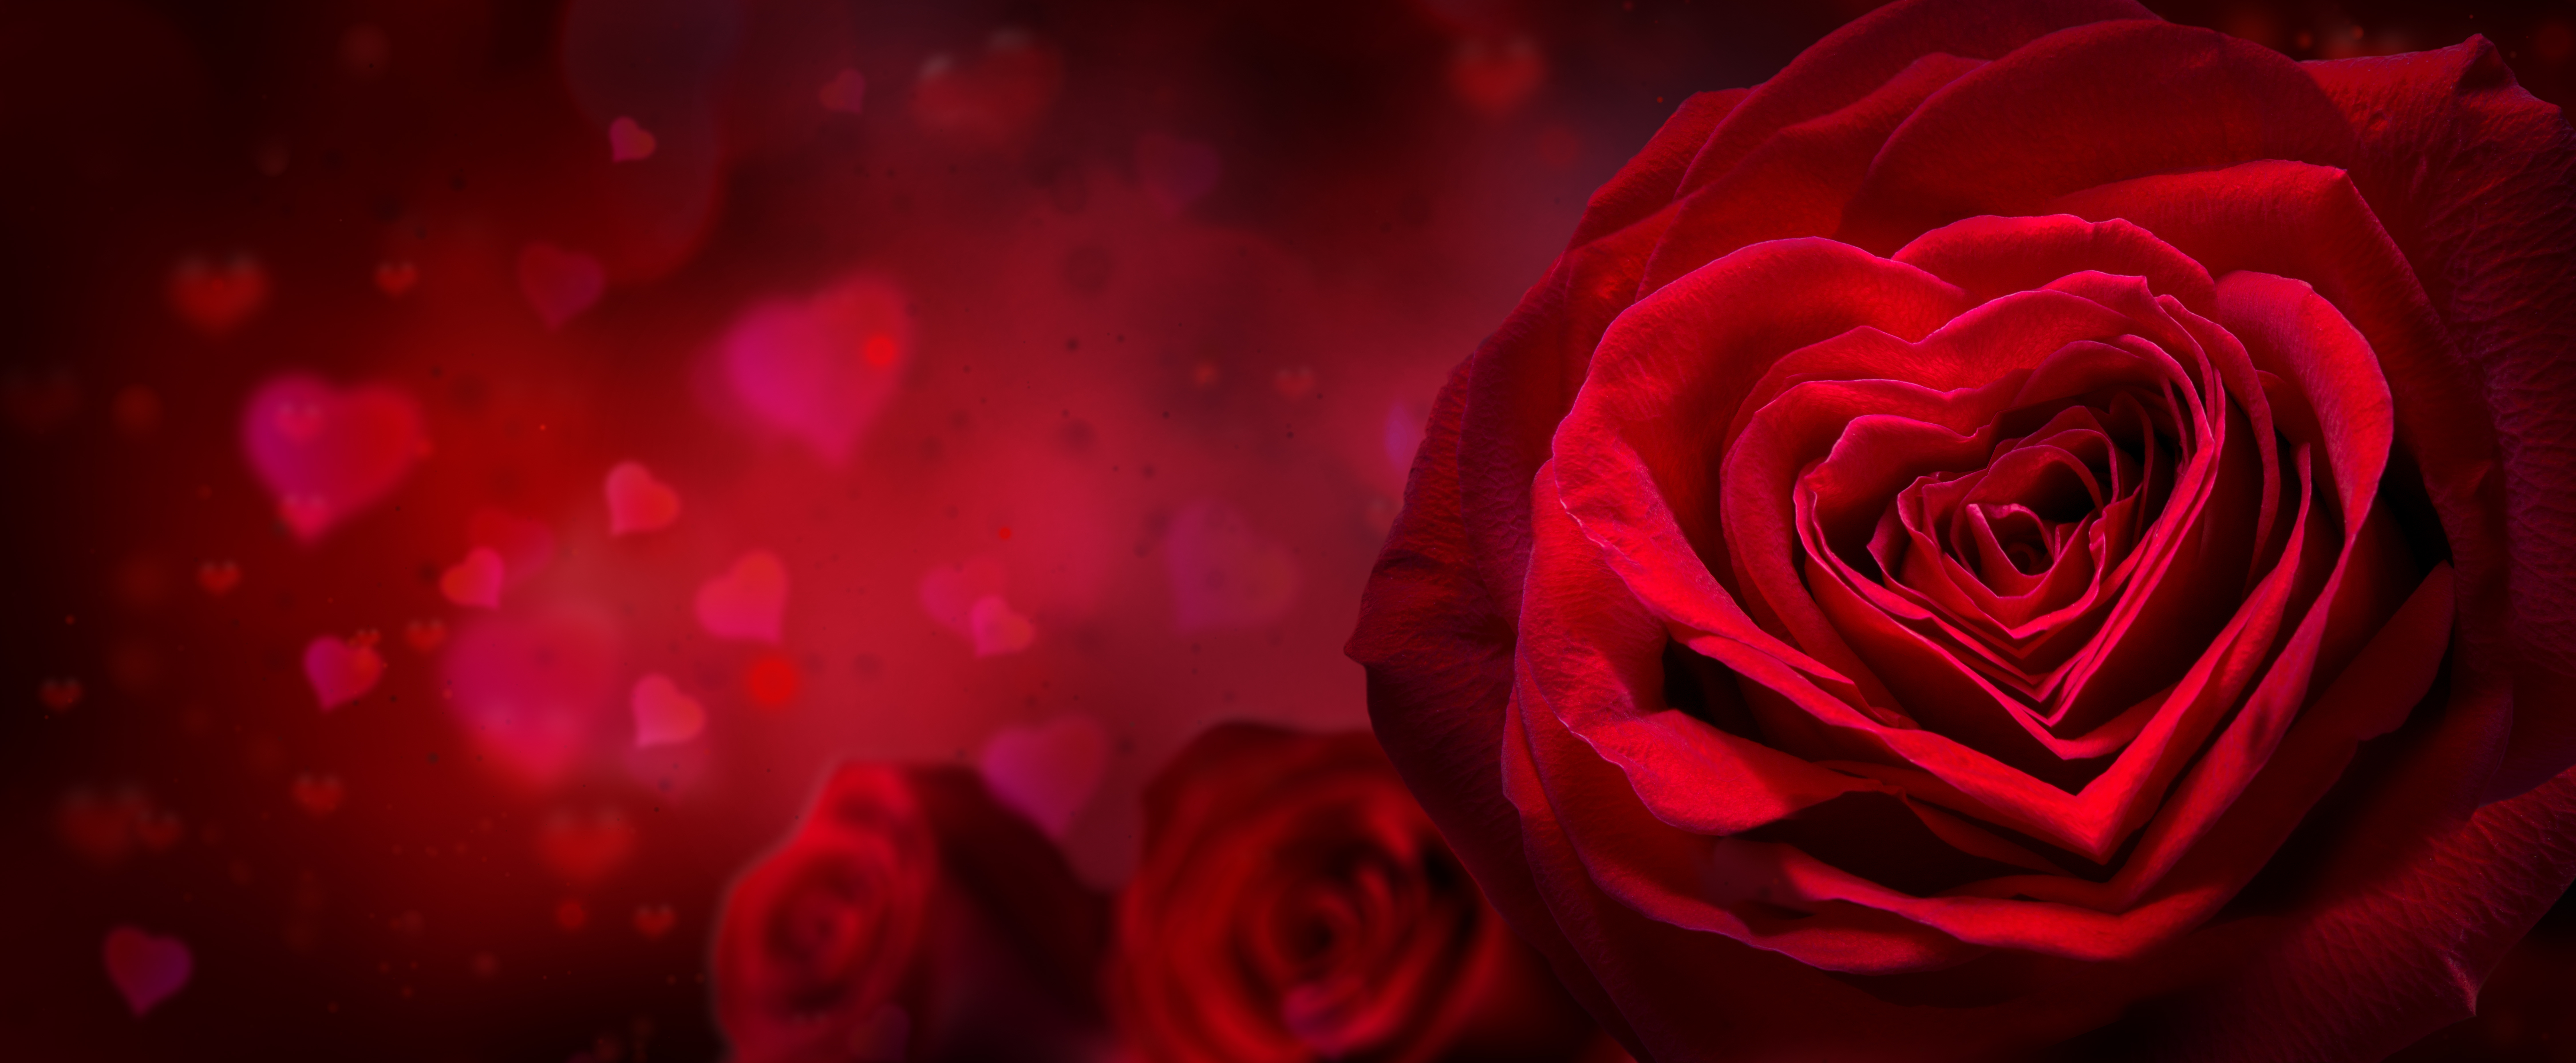 Wallpapers lovers day valentine s day red on the desktop